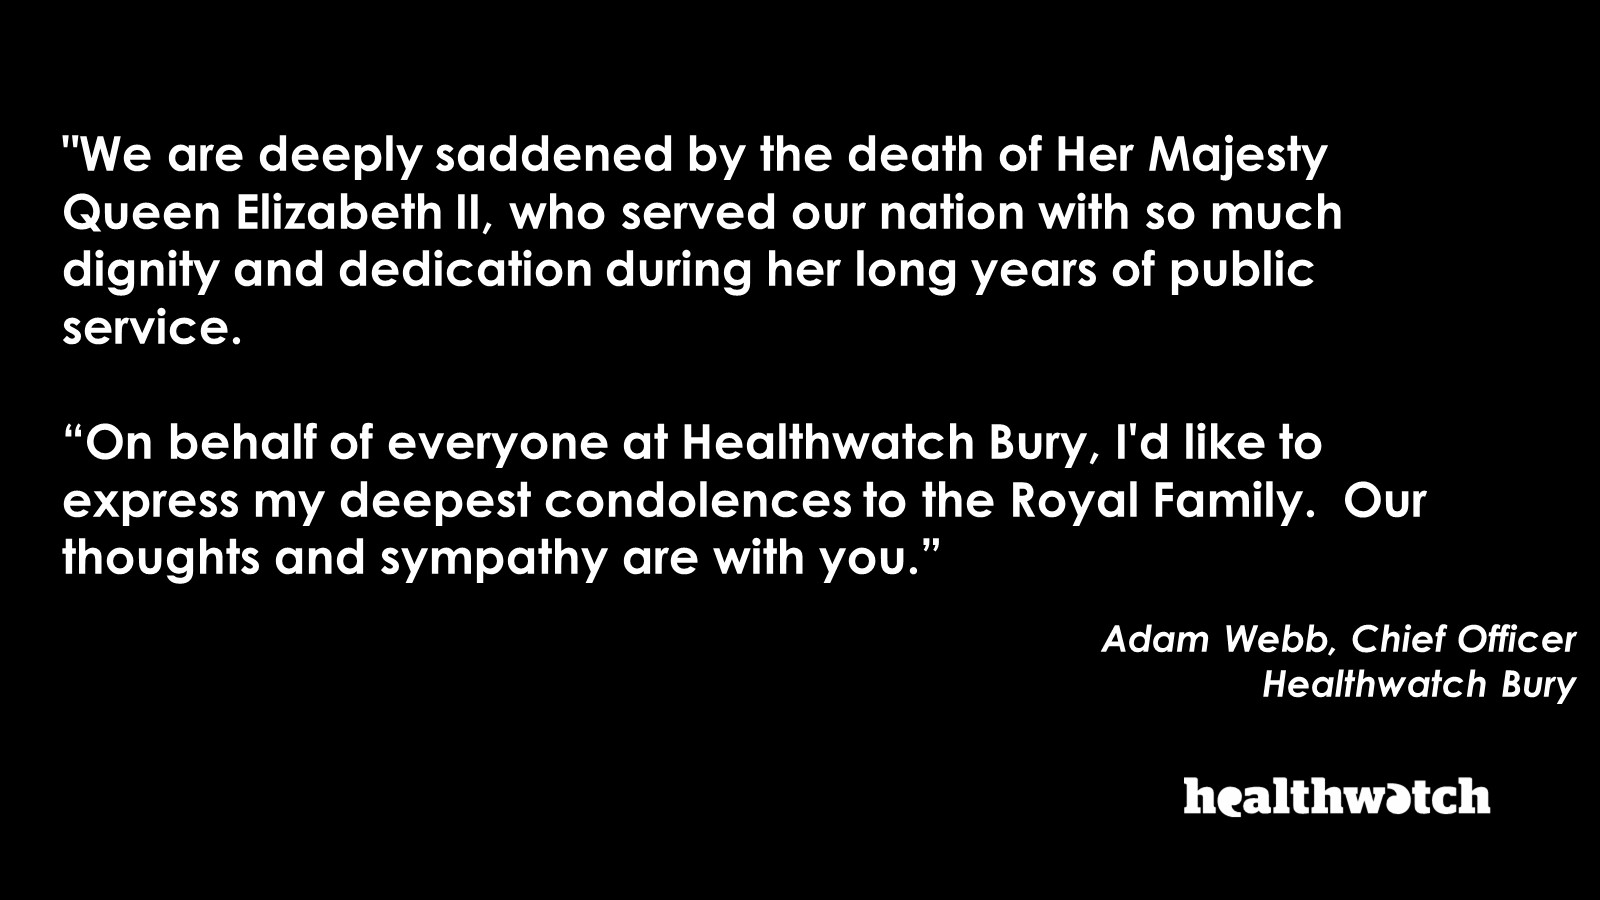 "We are deeply saddened by the death of Her Majesty Queen Elizabeth II, who served our nation with so much dignity and dedication during her long years of public service.  “On behalf of everyone at Healthwatch Bury, I'd like to express my deepest condolen